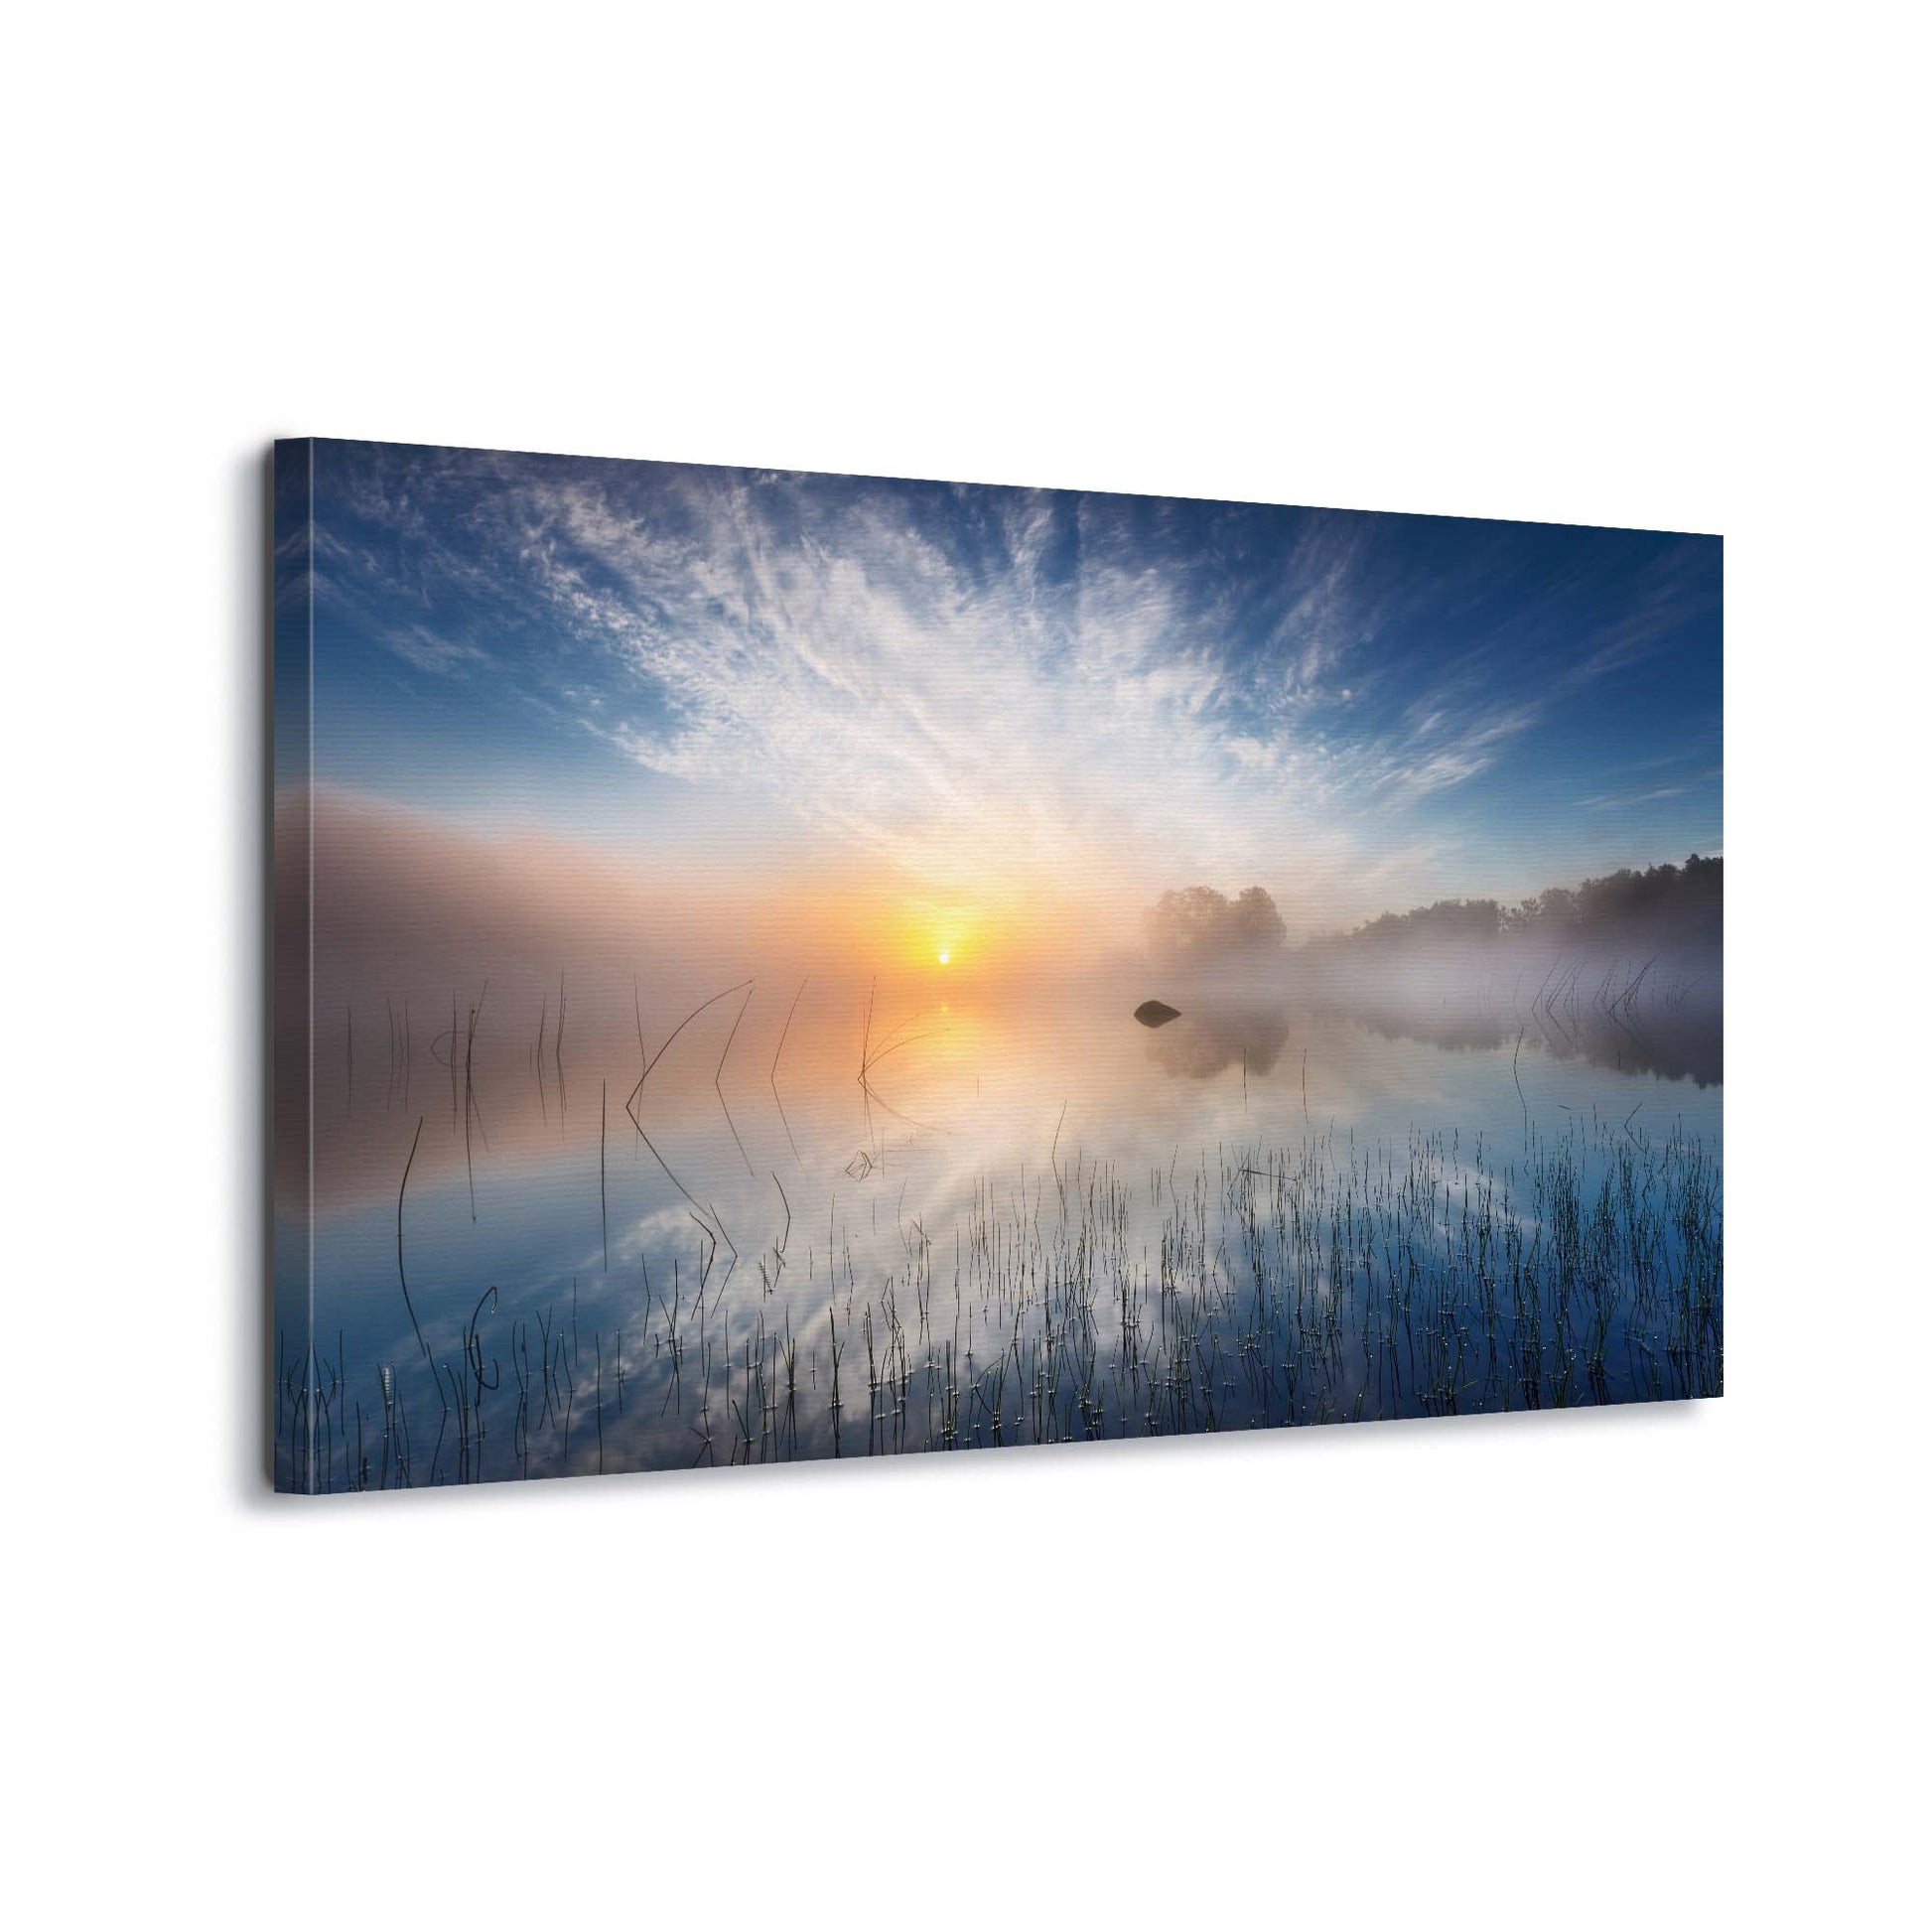 Reflection by Martin Lutz Canvas Print - USTAD HOME